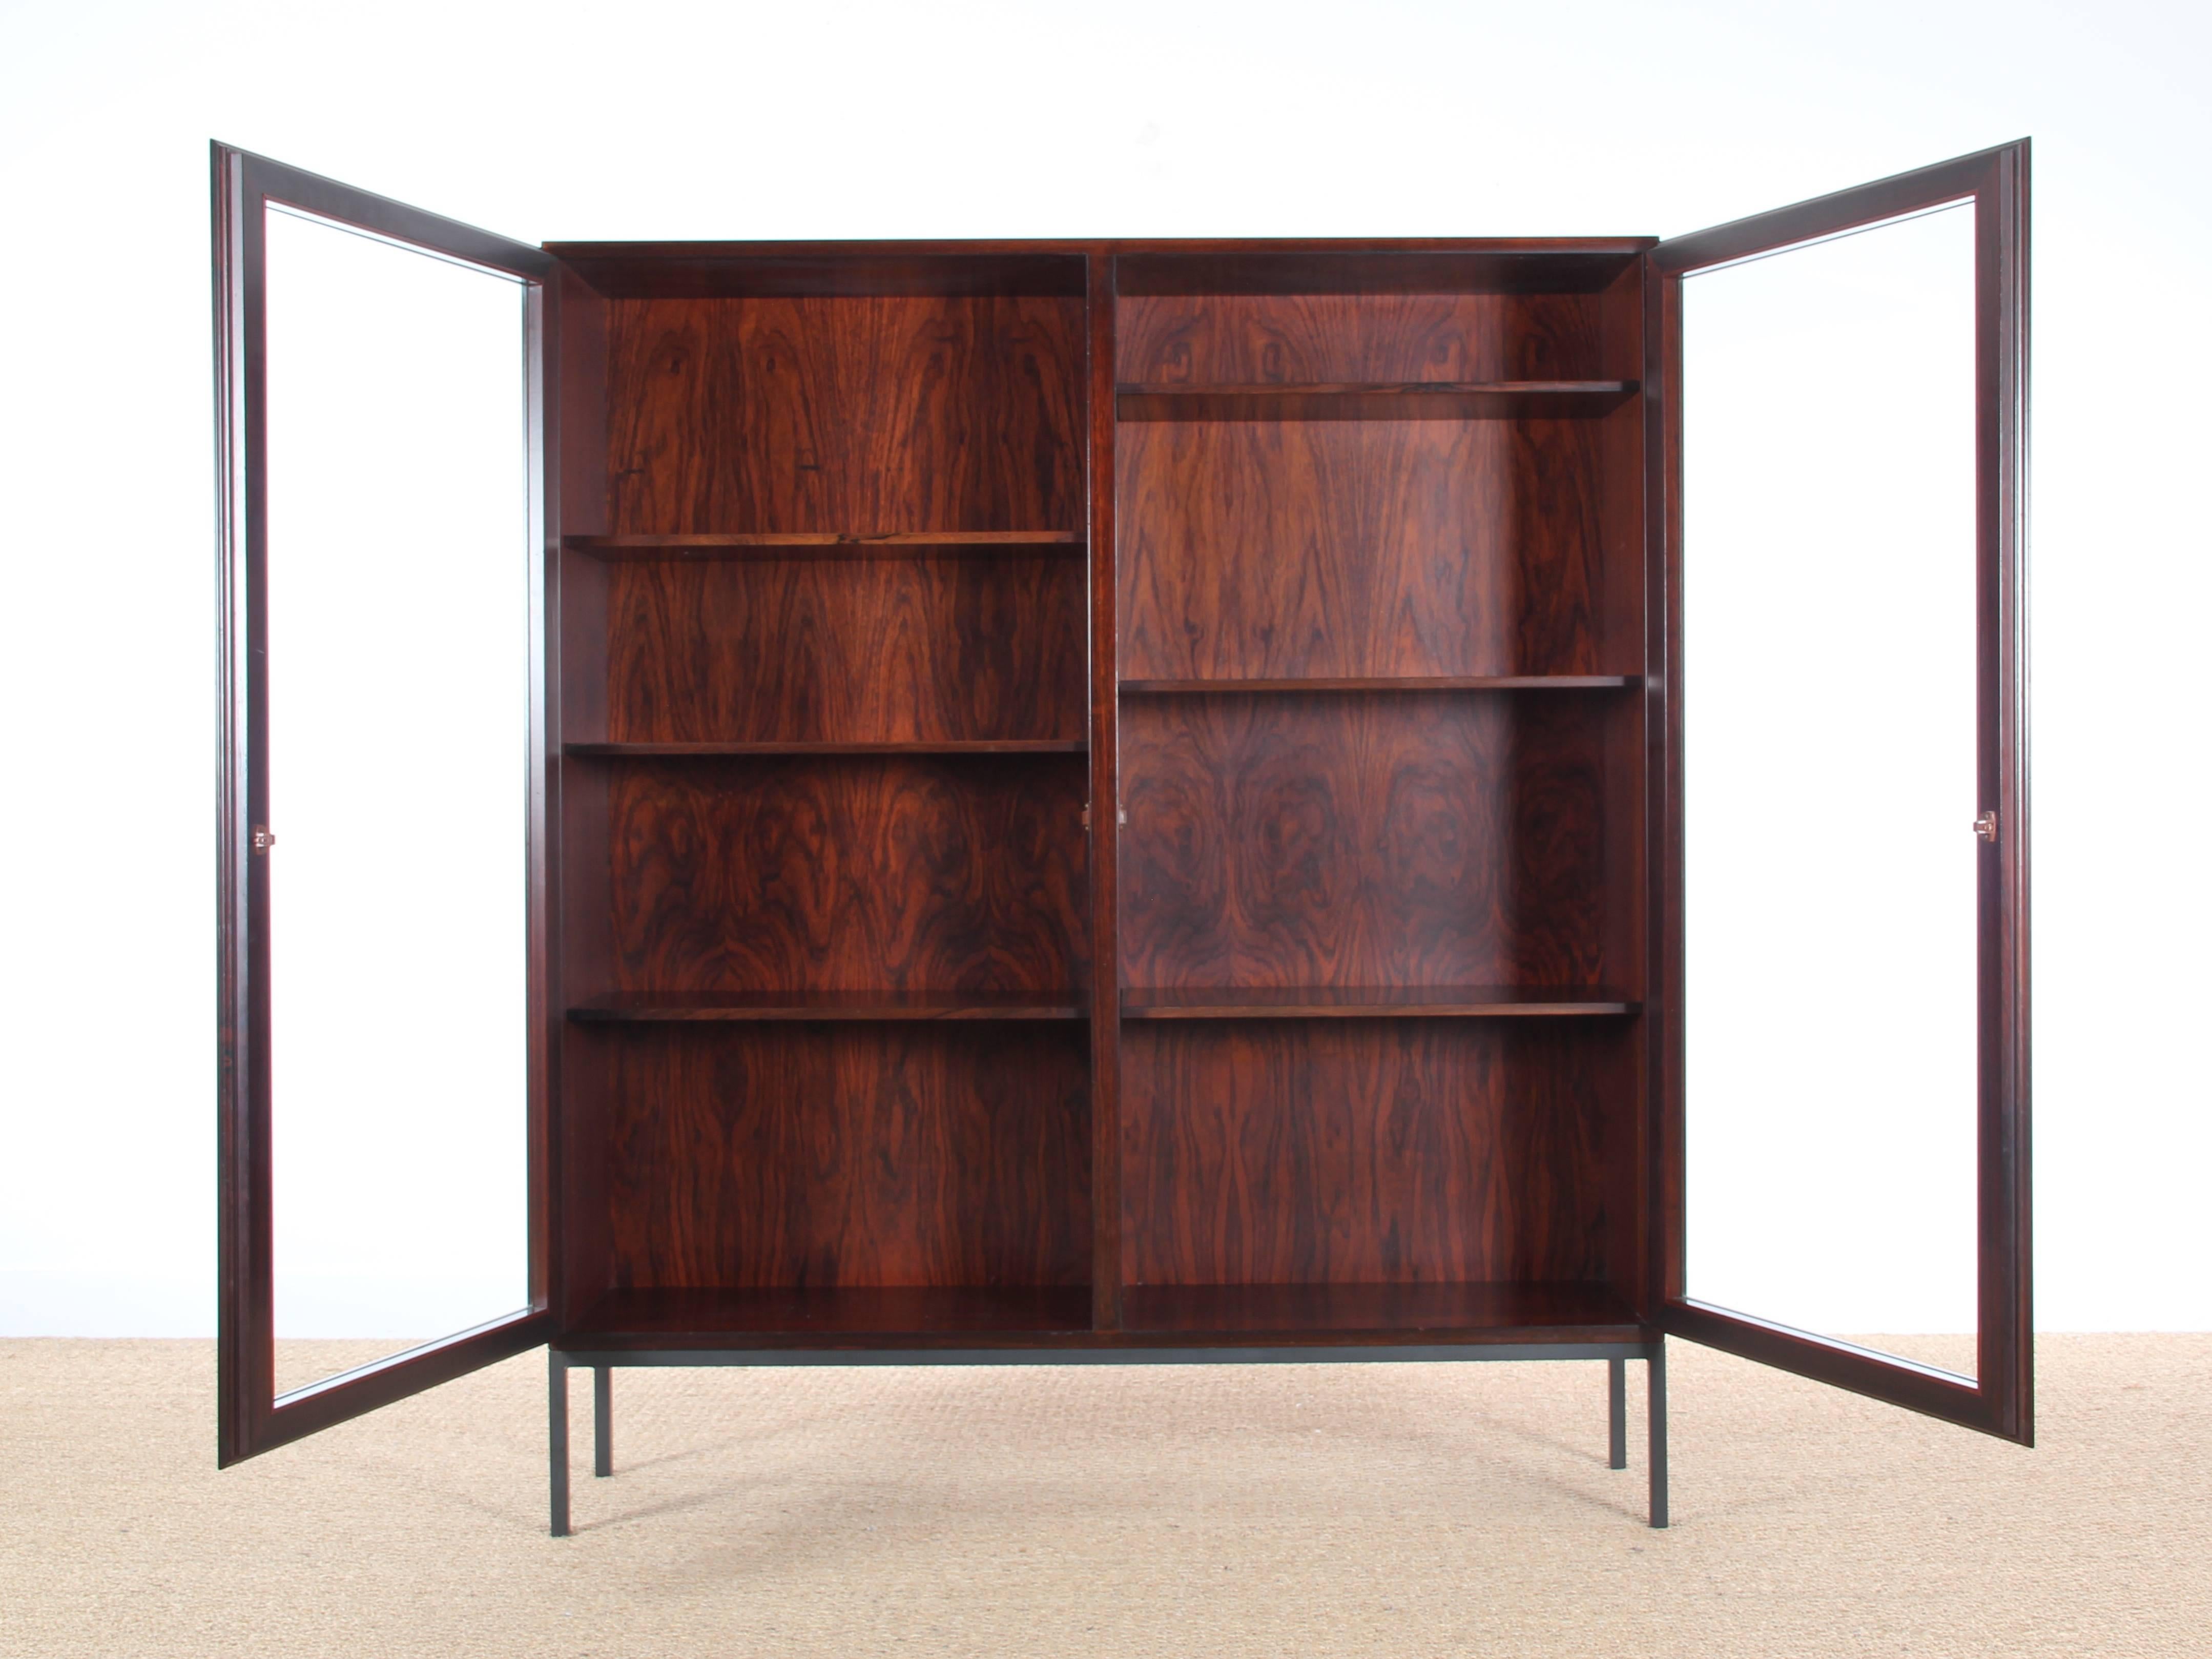 Library showcase duplicate rosewood for Omann junior, six adjustable shelves, mounted on black lacquered metal legs. Very nice finish.